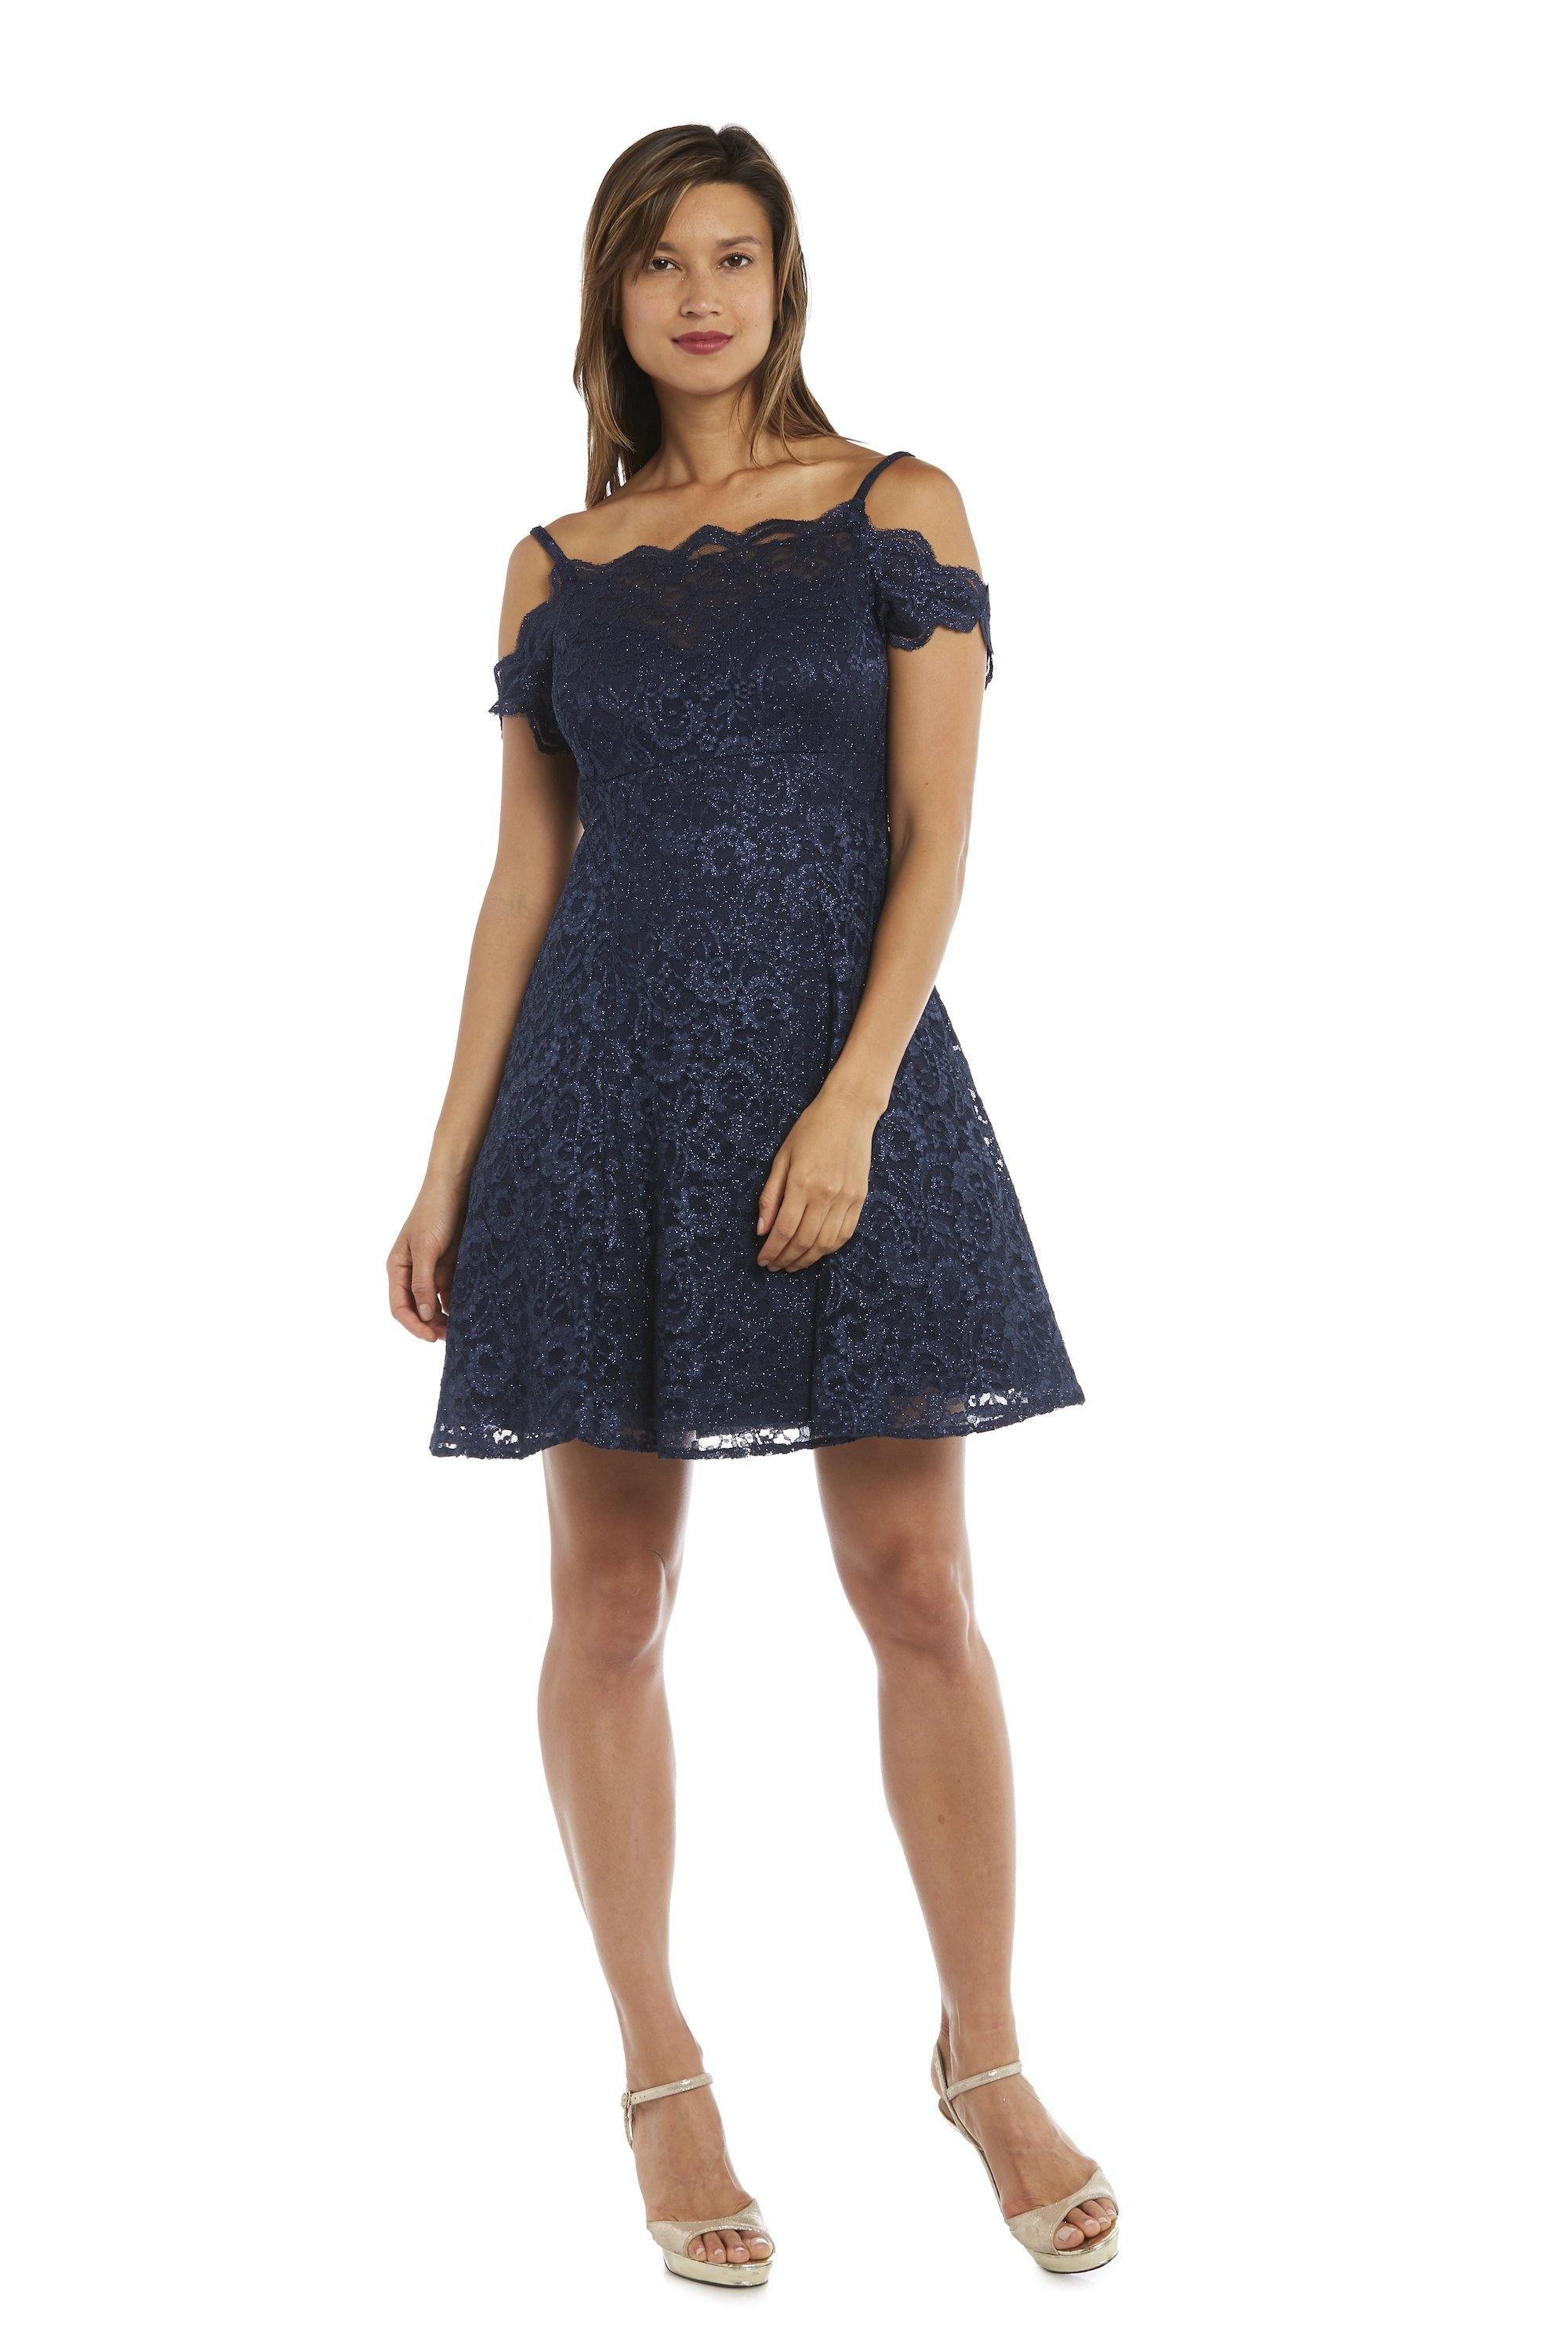 Morgan & Co Short Flare Dress 12395 - The Dress Outlet